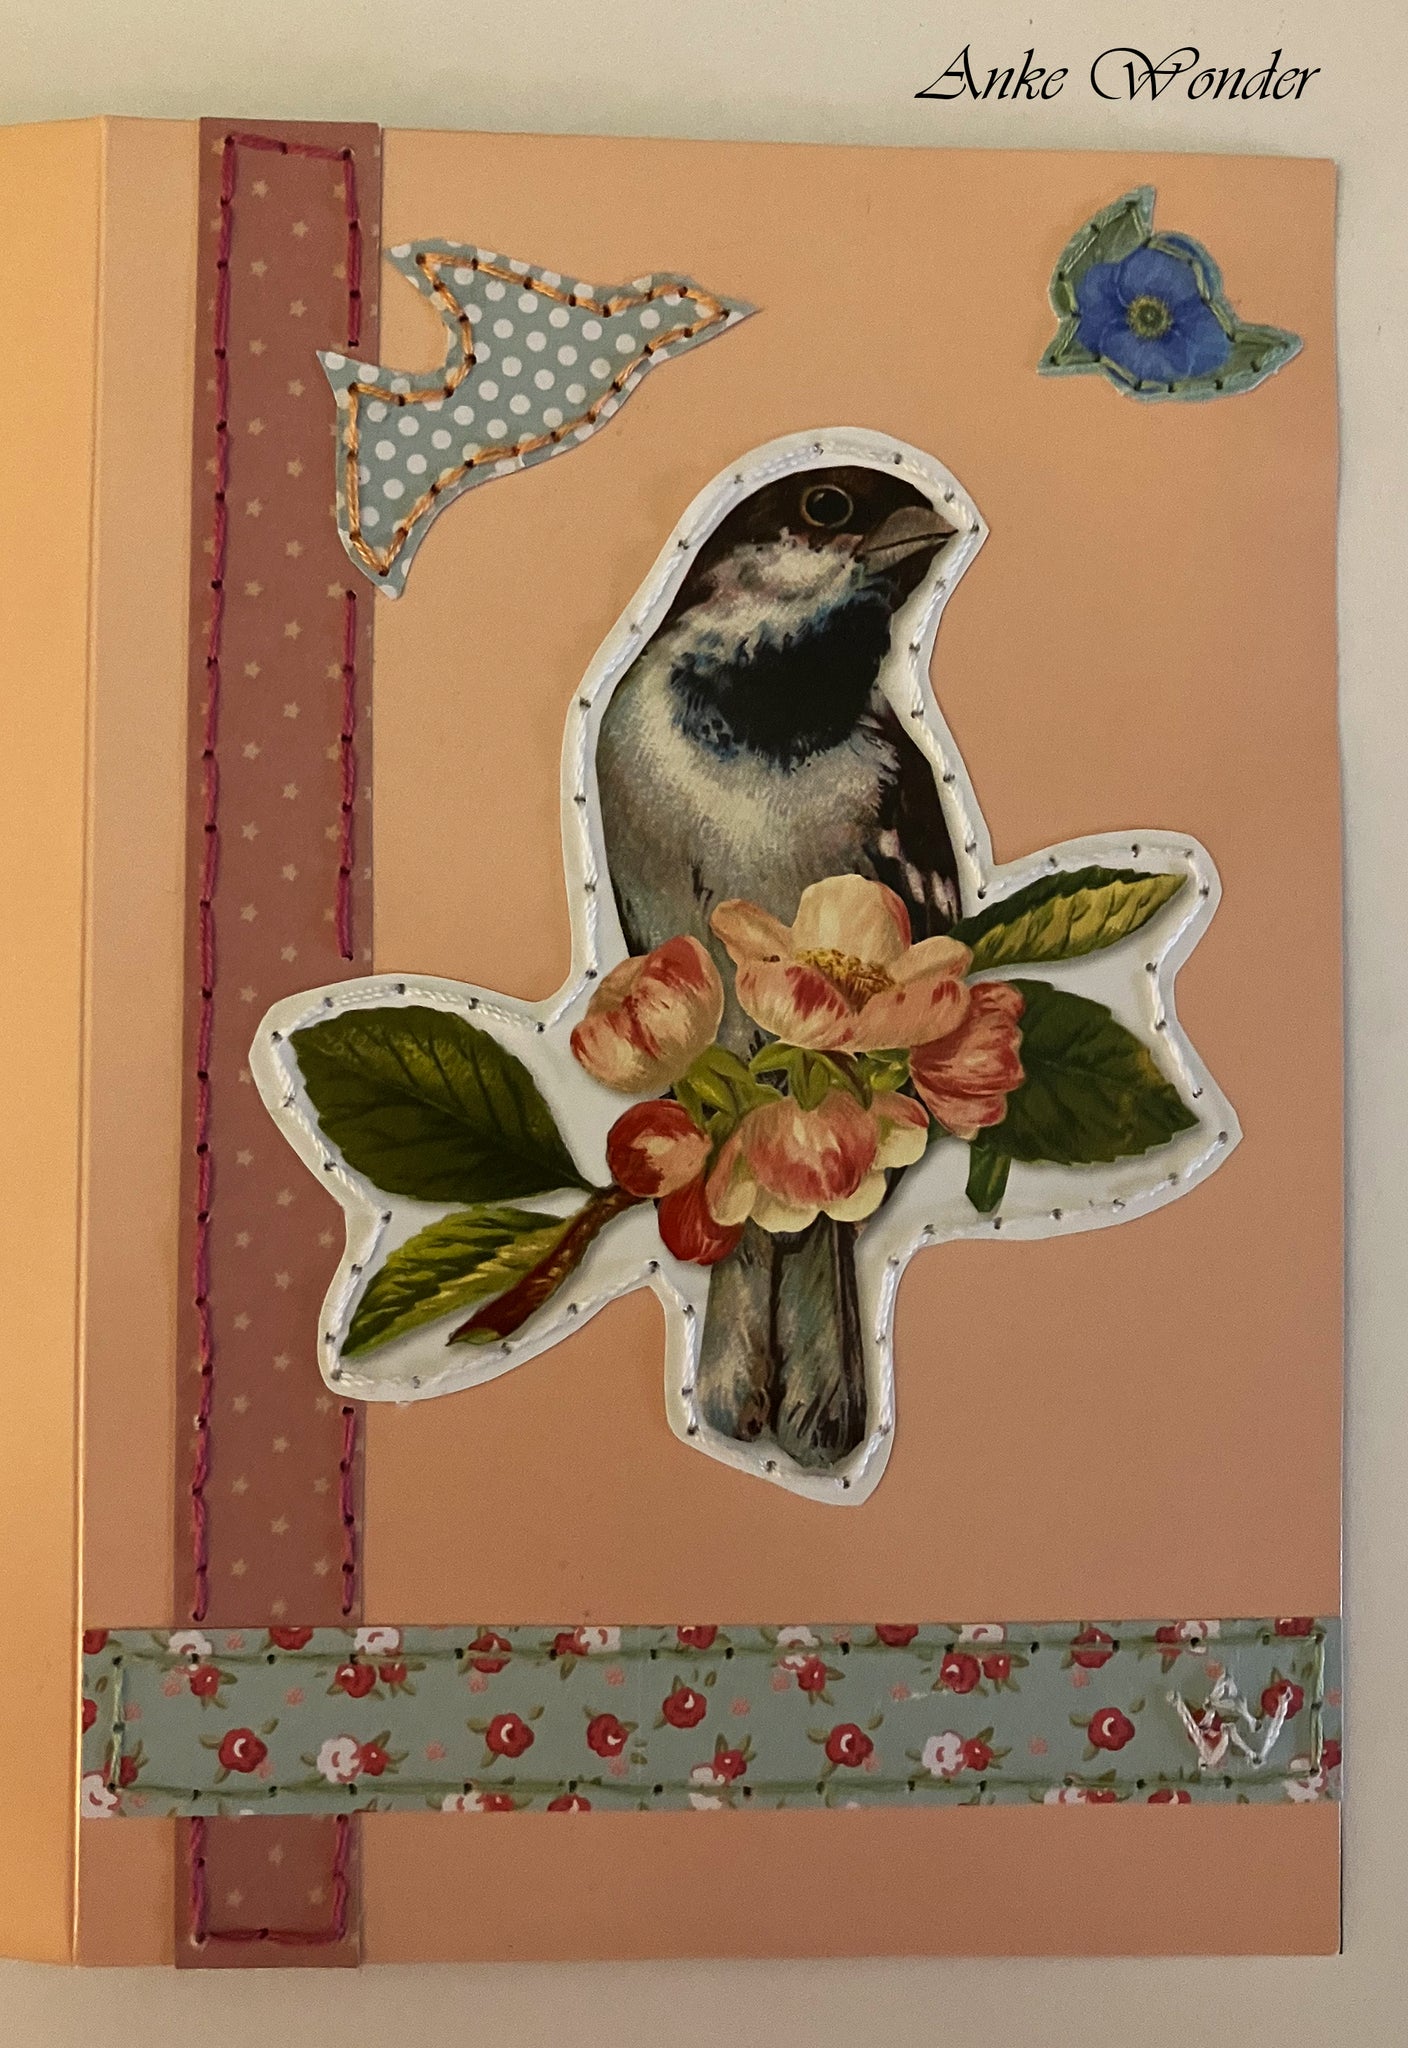 Hand-Embroidered vintage greeting card with a bird application for gifting.